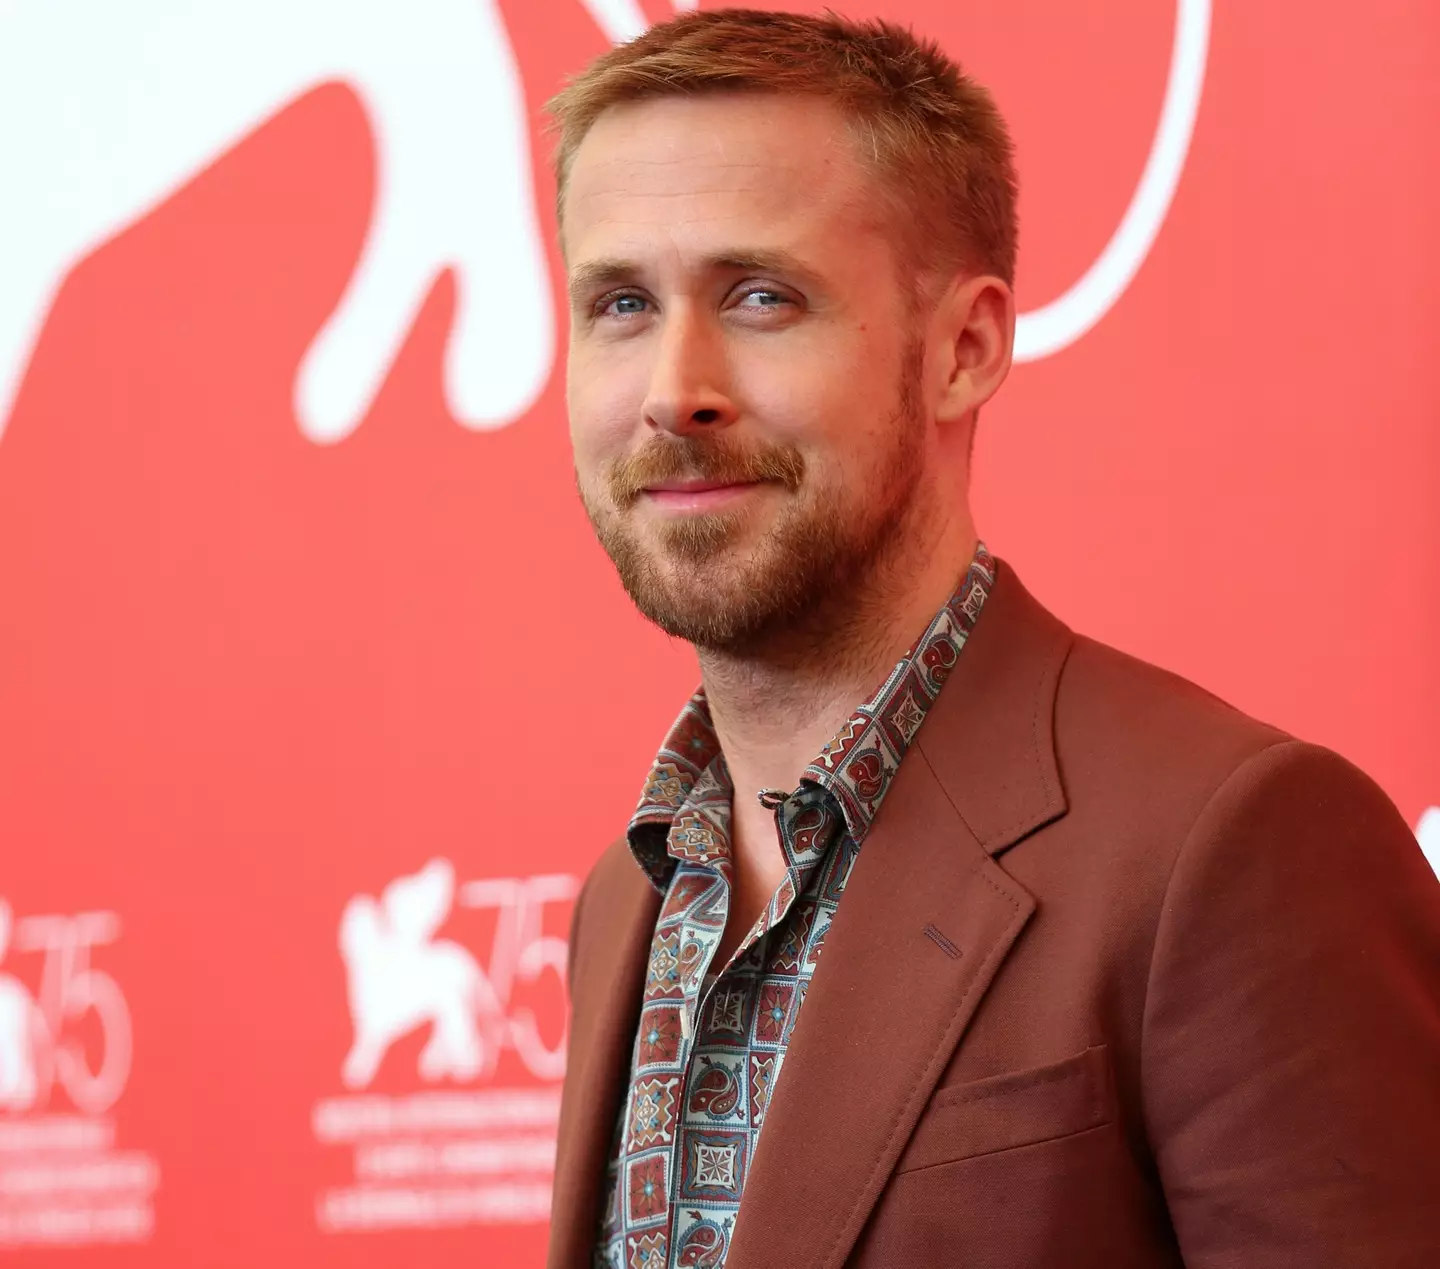 Ryan Gosling has gone viral on social media for his supposed reaction to Will Smith whacking Chris Rock at the Oscars.